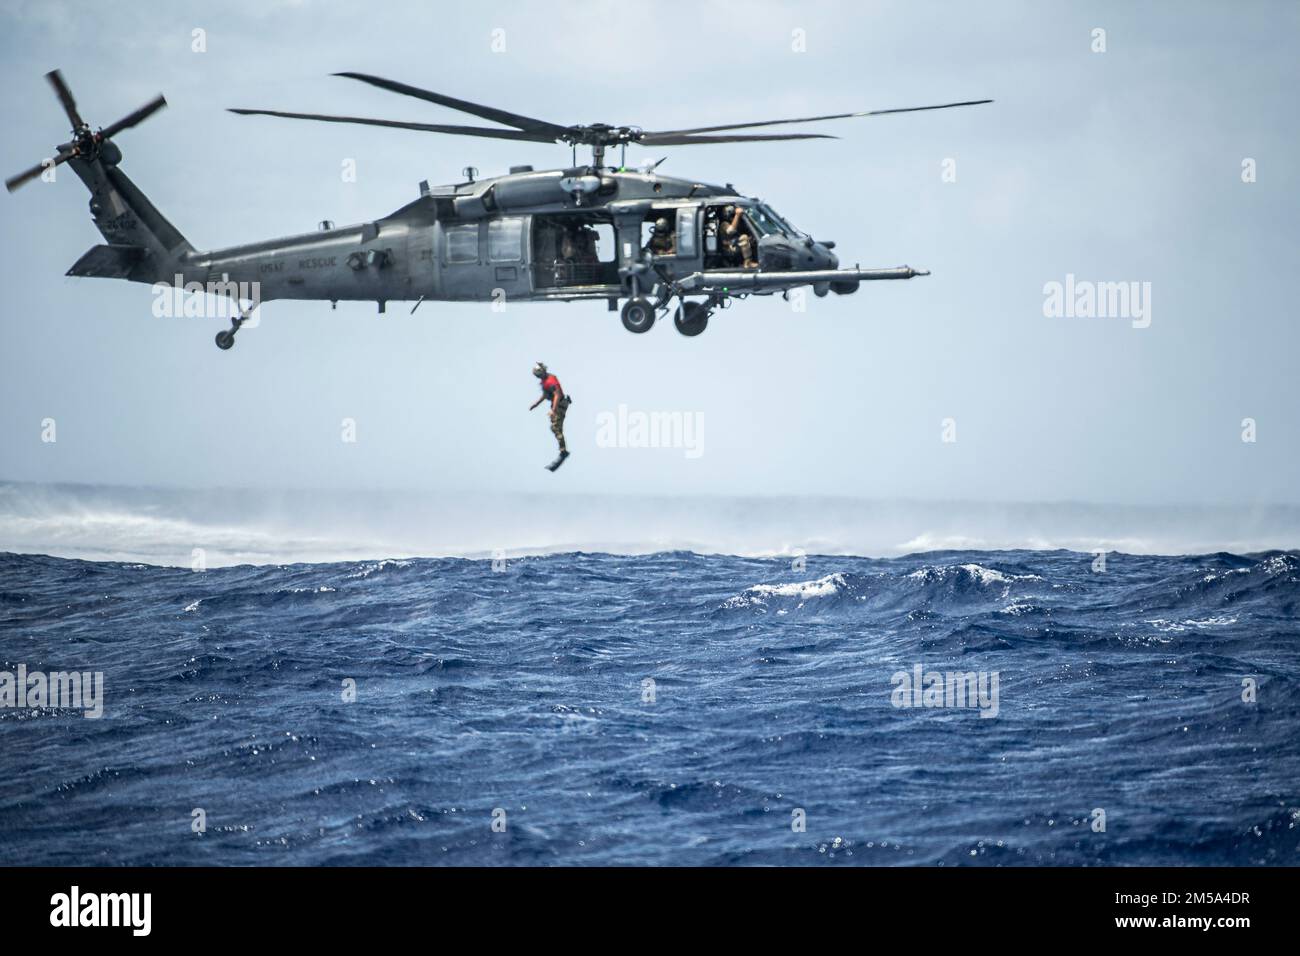 A U.S. Air Force pararescueman with the 31st Rescue Squadron jumps out of an HH-60G Pave Hawk from the 33rd Rescue Squadron during exercise Cope North 22 at the Island of Tinian near Andersen Air Force Base, Guam, Feb. 14, 2022. Japanese and U.S. Air Force members trained together in participation of Cope North 2022, multilateral U.S. Pacific Air Forces-sponsored field training exercise conducted annually at Andersen AFB, Guam focused on combat air forces’ large-force employment and humanitarian assistance and disaster relief training to enhance interoperability among U.S., Australian, and Jap Stock Photo